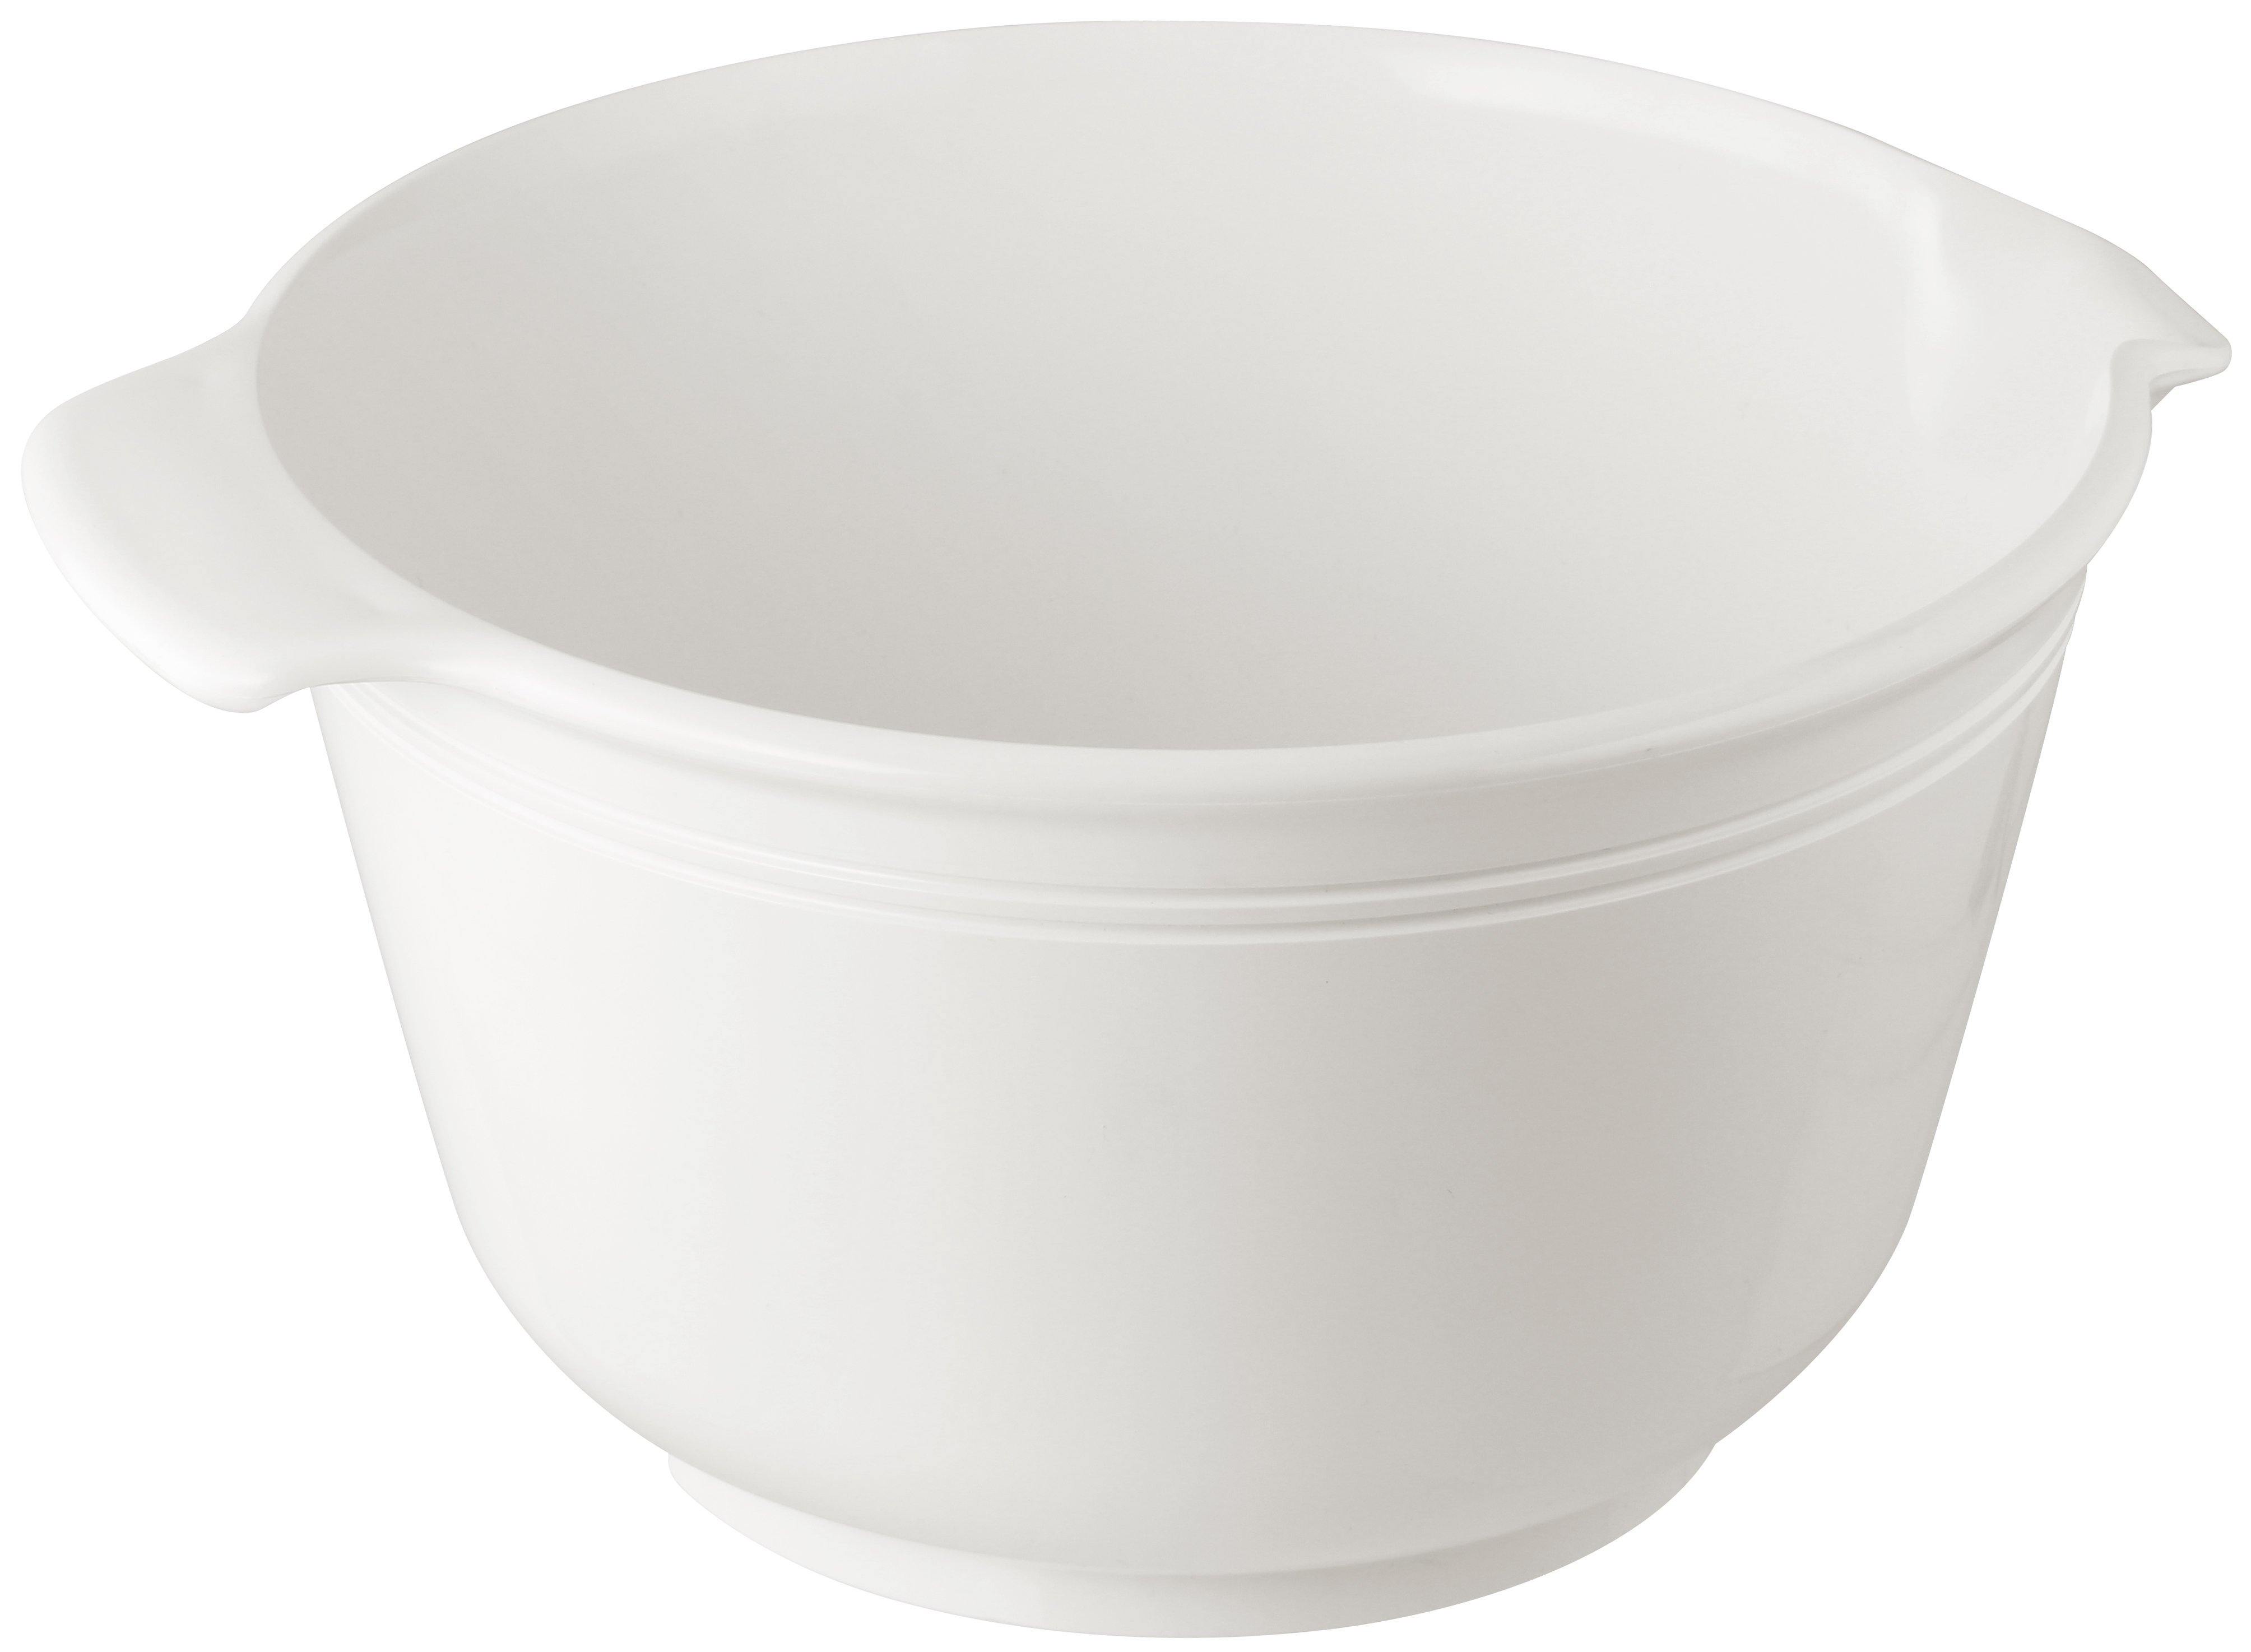 Dr. Oetker Mixing Bowl, White, 23X14 Cm, 3L - Whole and All